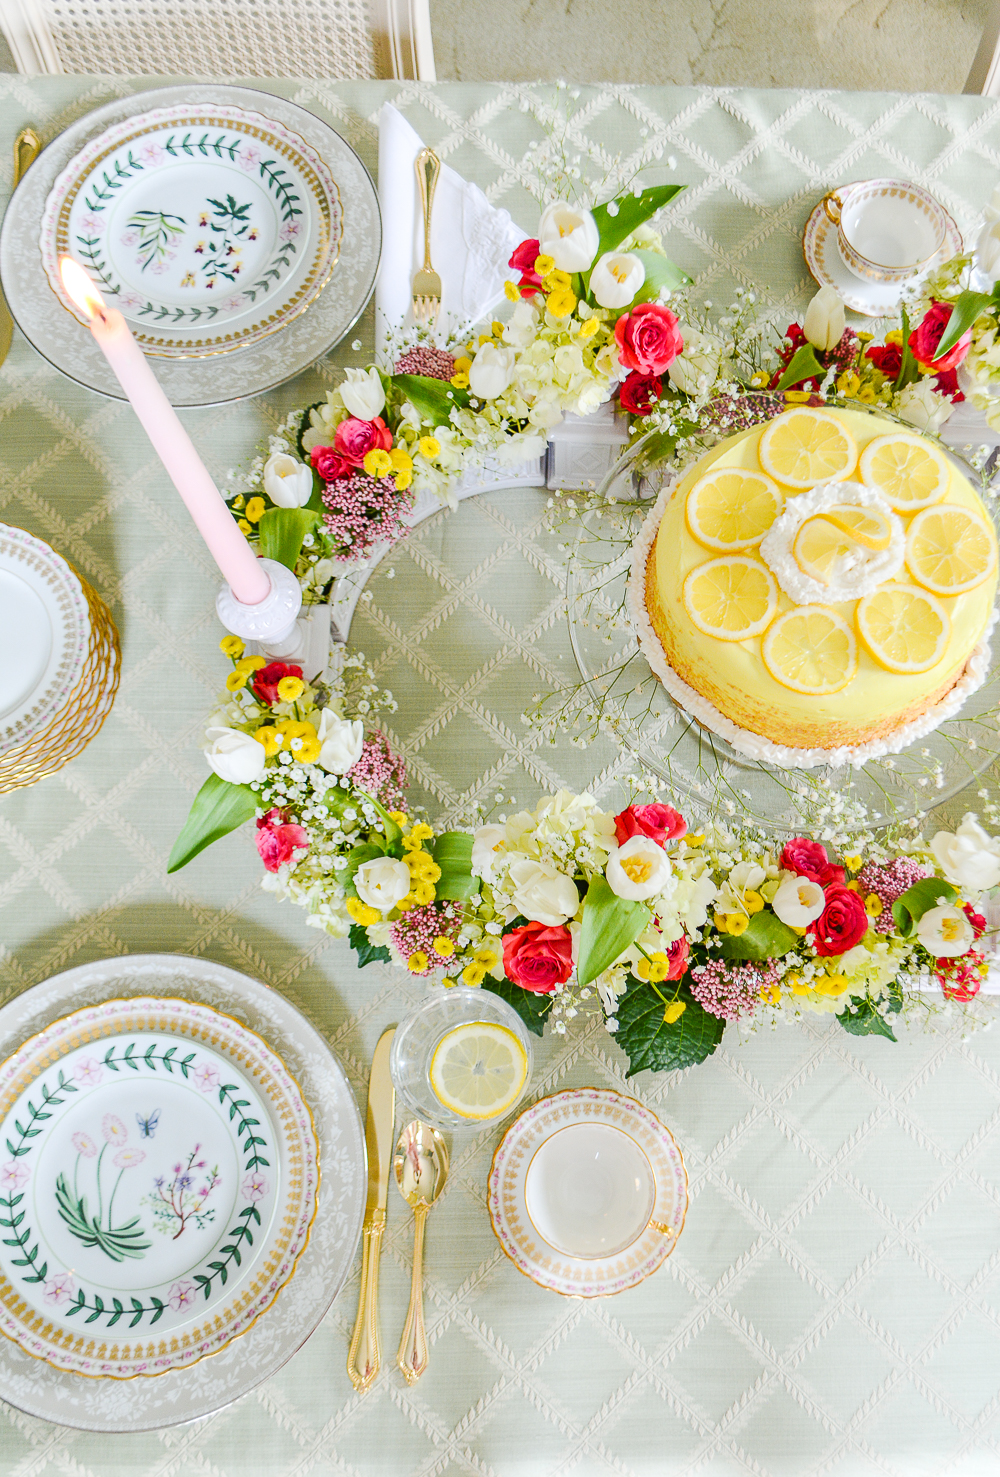 top view of Regency inspired shower tablescape with lemon cake, pink, green, and yellow florals, laurel leaf tablecloth in pale green, and botanical china